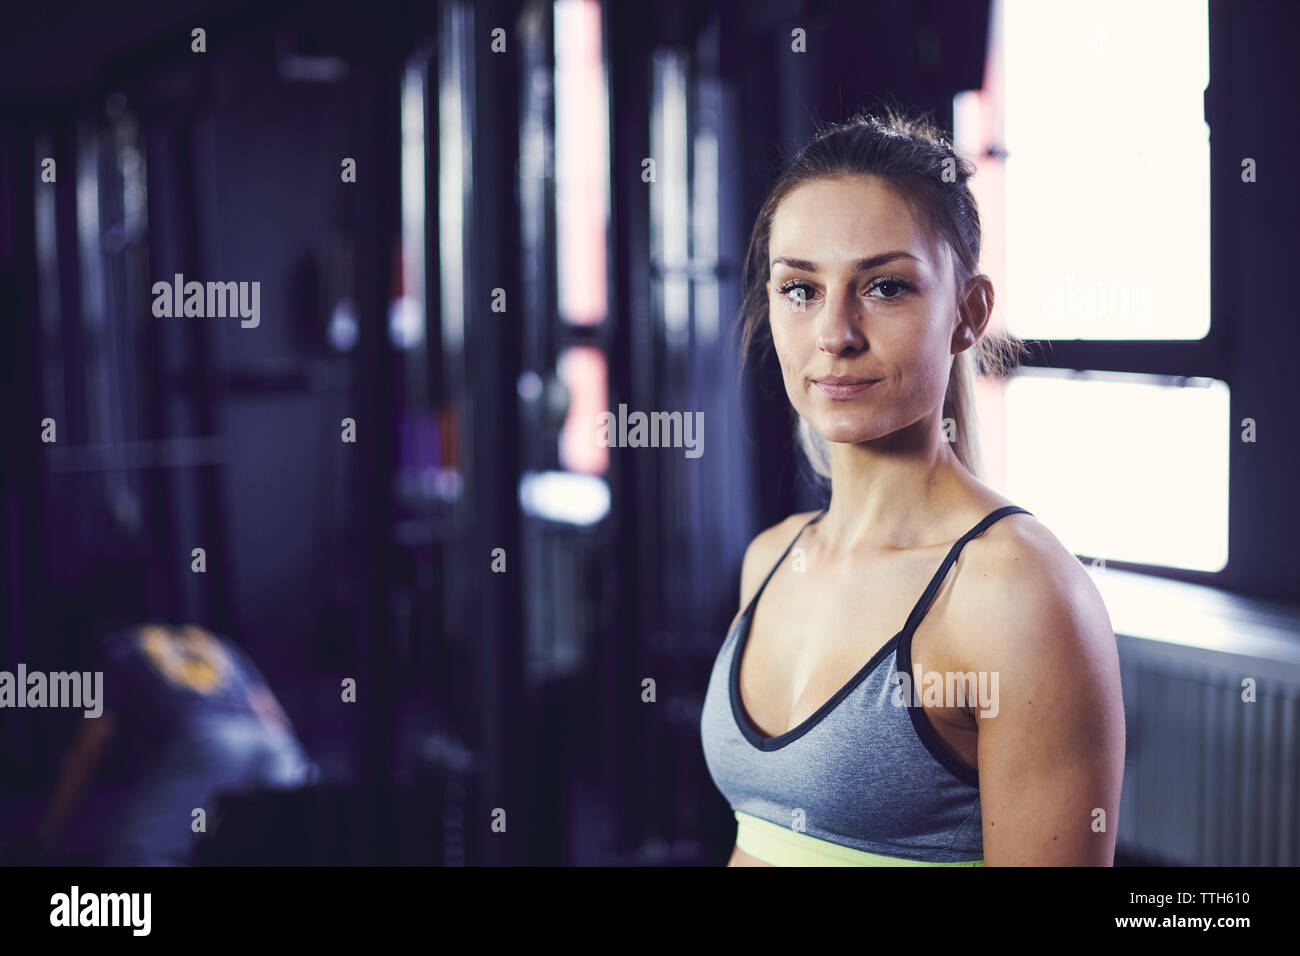 Portrait of young attractive woman at the fitness centre Stock Photo